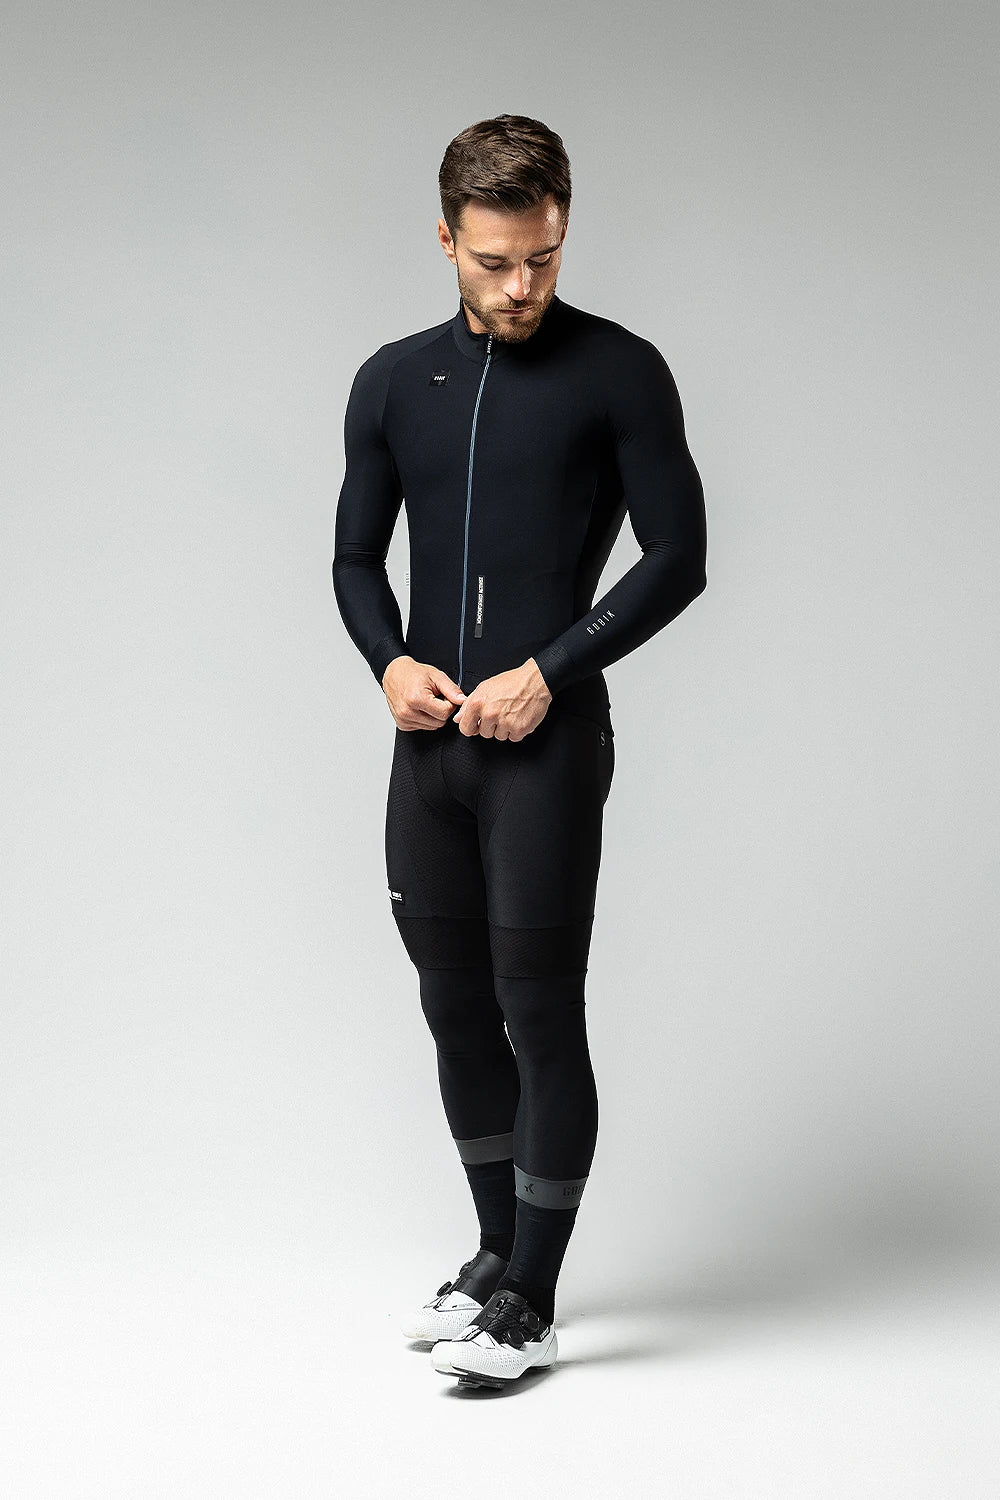 MAILLOT MANCHES LONGUES PACER SOLID HOMME JASPER